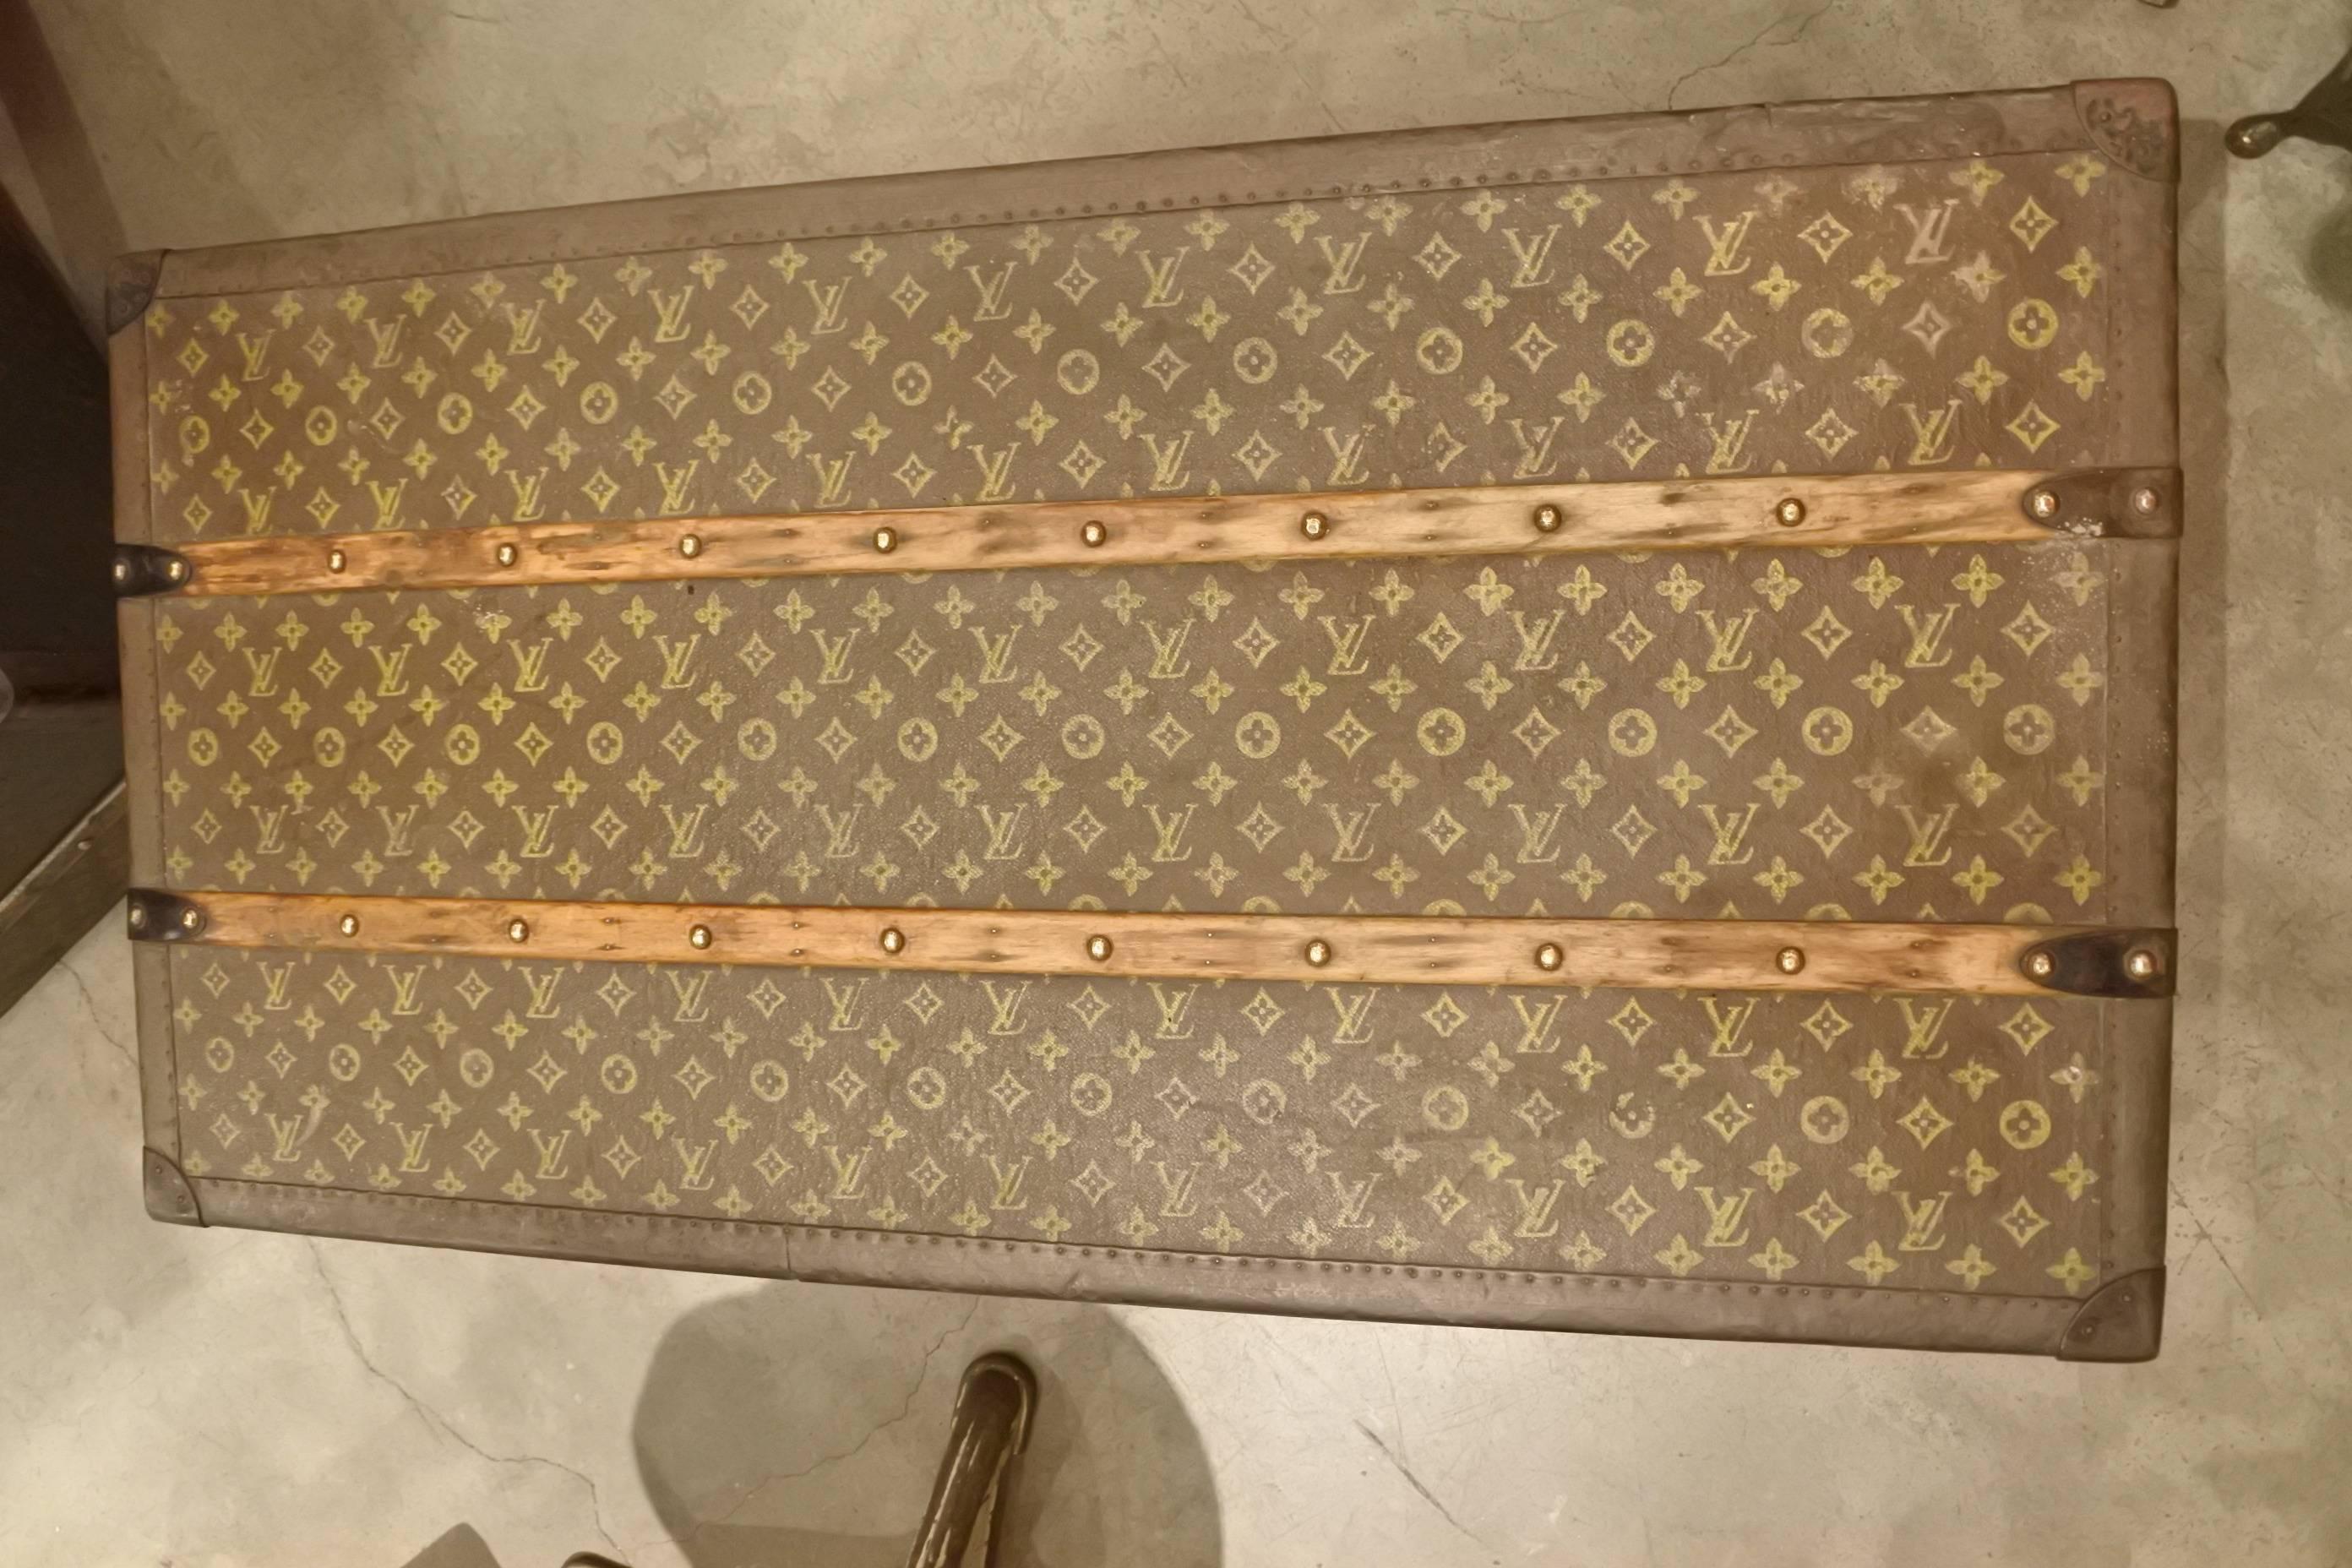 Vintage Louis Vuitton steamer trunk from early 20th century. Impeccable condition with minor patination on brass hardware. Perfect size for a coffee table. No odors, spotting, or major flaws.
Great early example of Louis Vuitton's iconic steamer